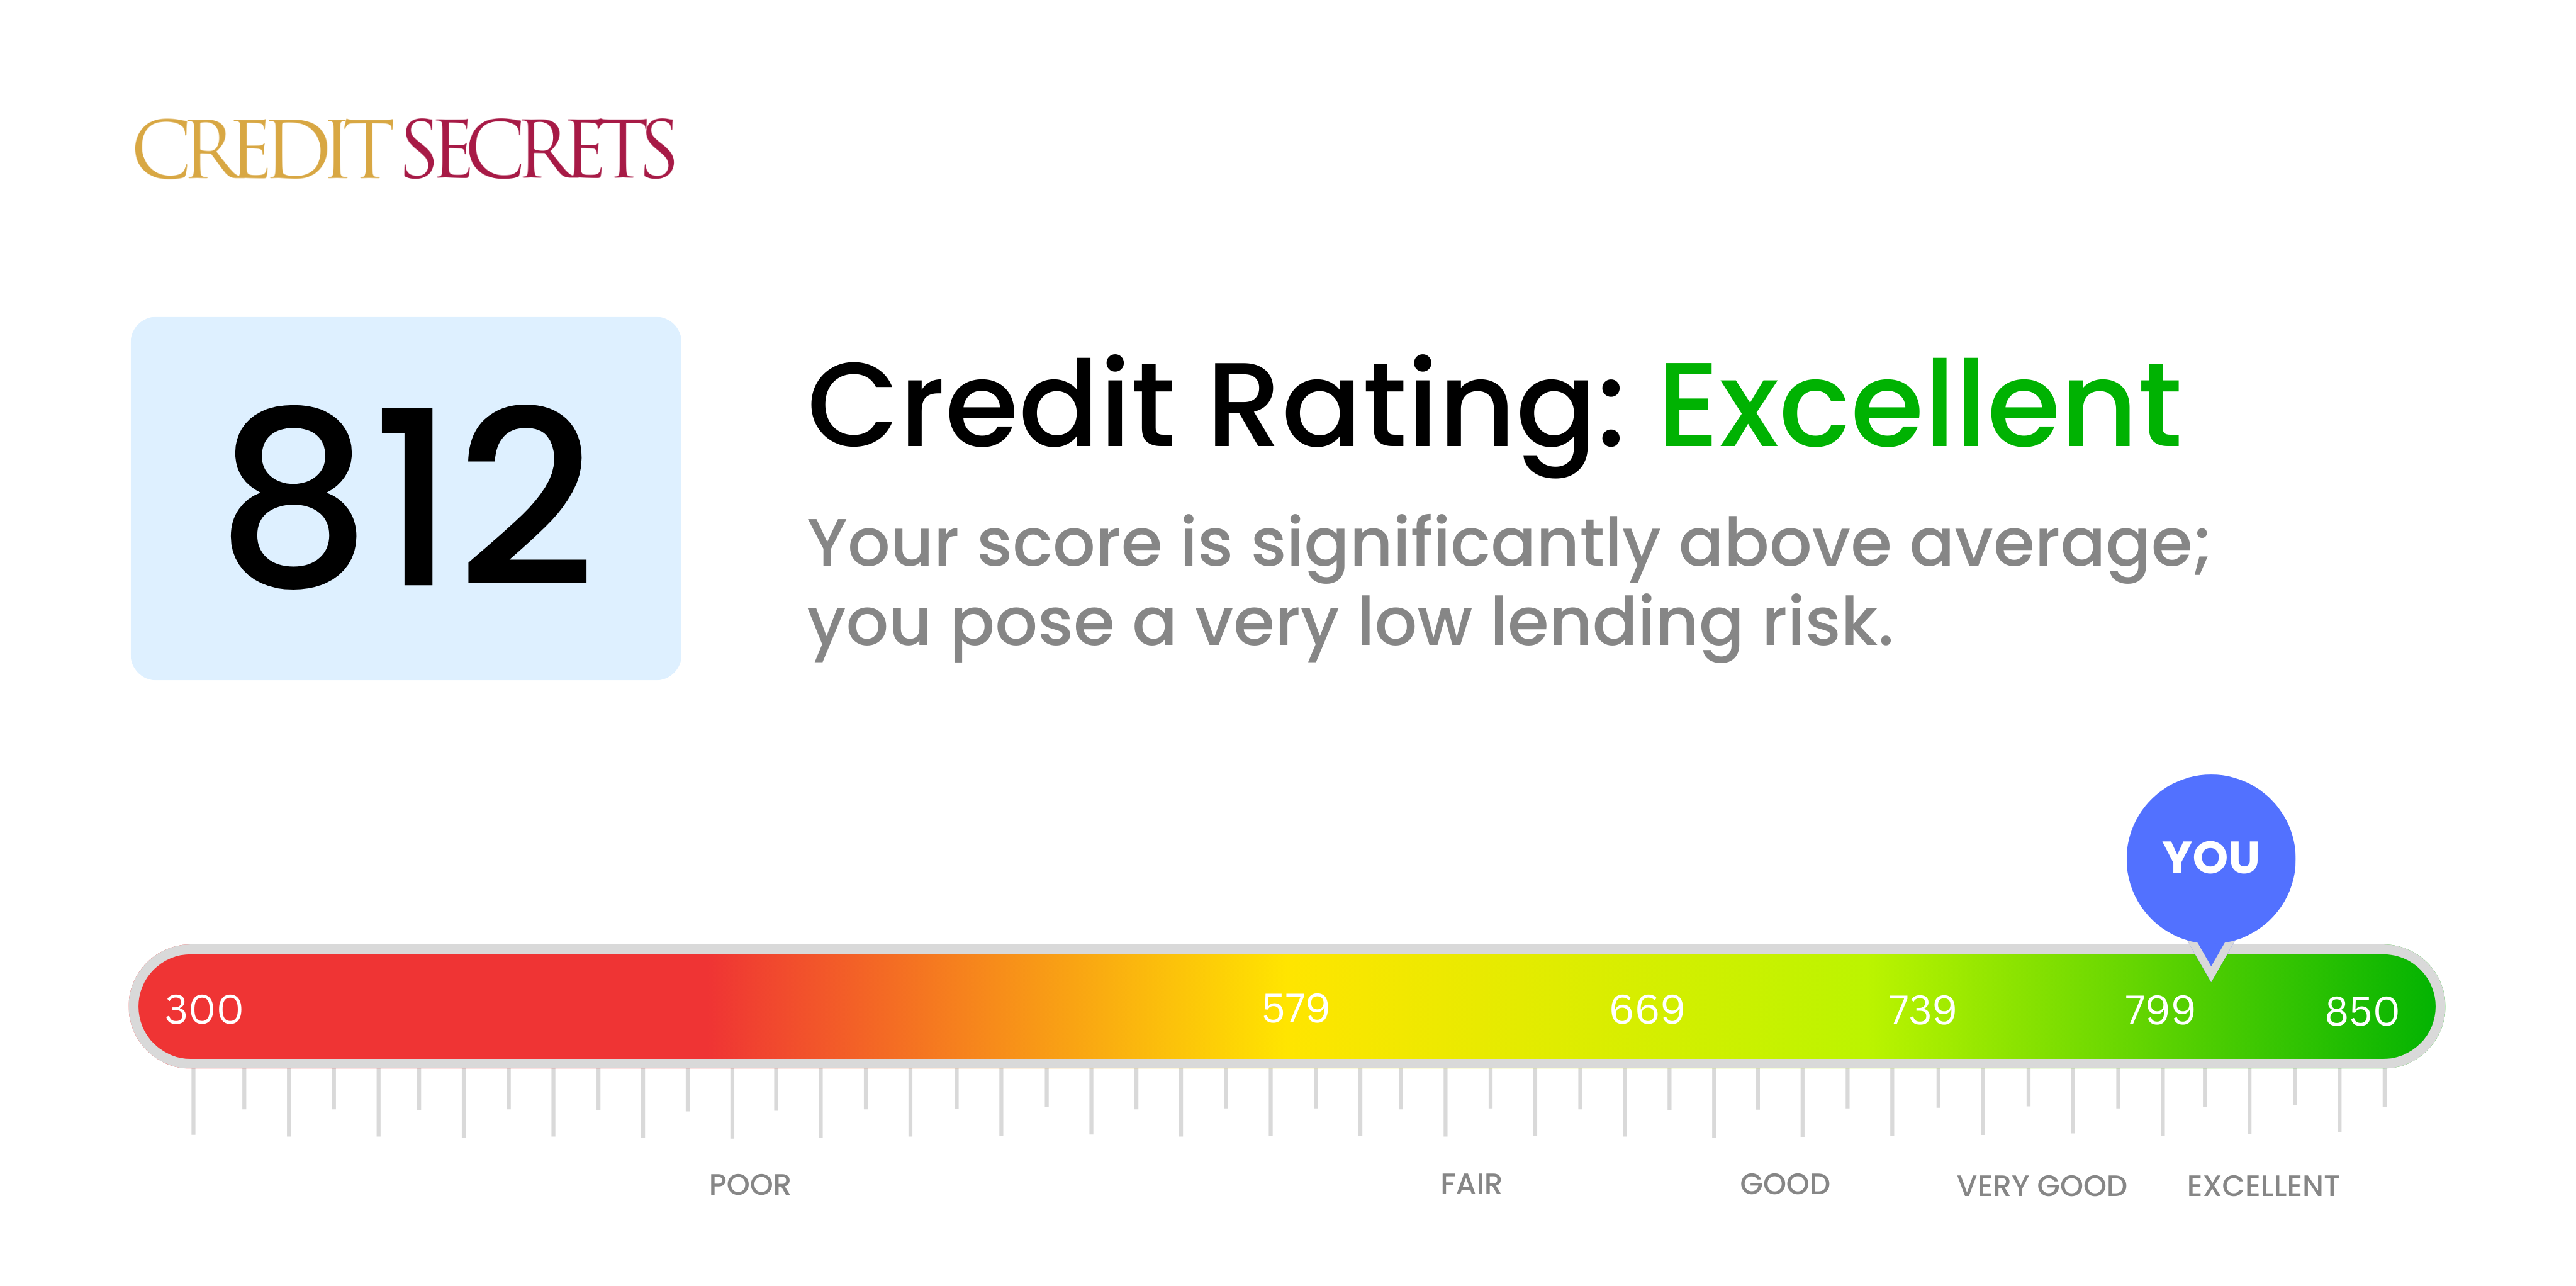 Is 812 a good credit score?